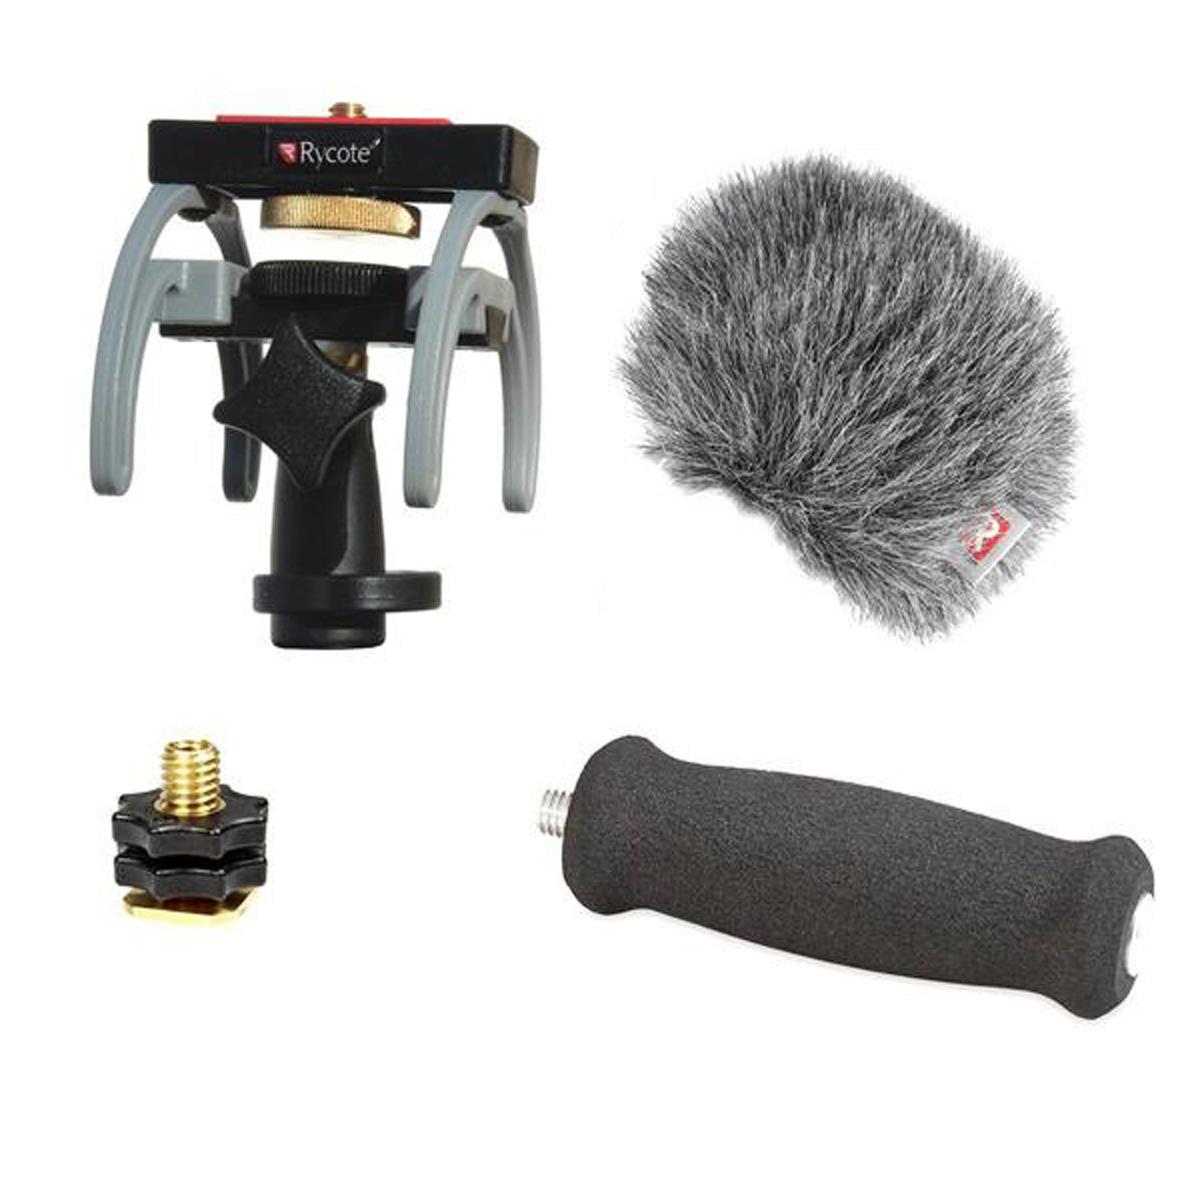 Image of Rycote Recorder Audio Kit for Zoom H6 Digital Recorder